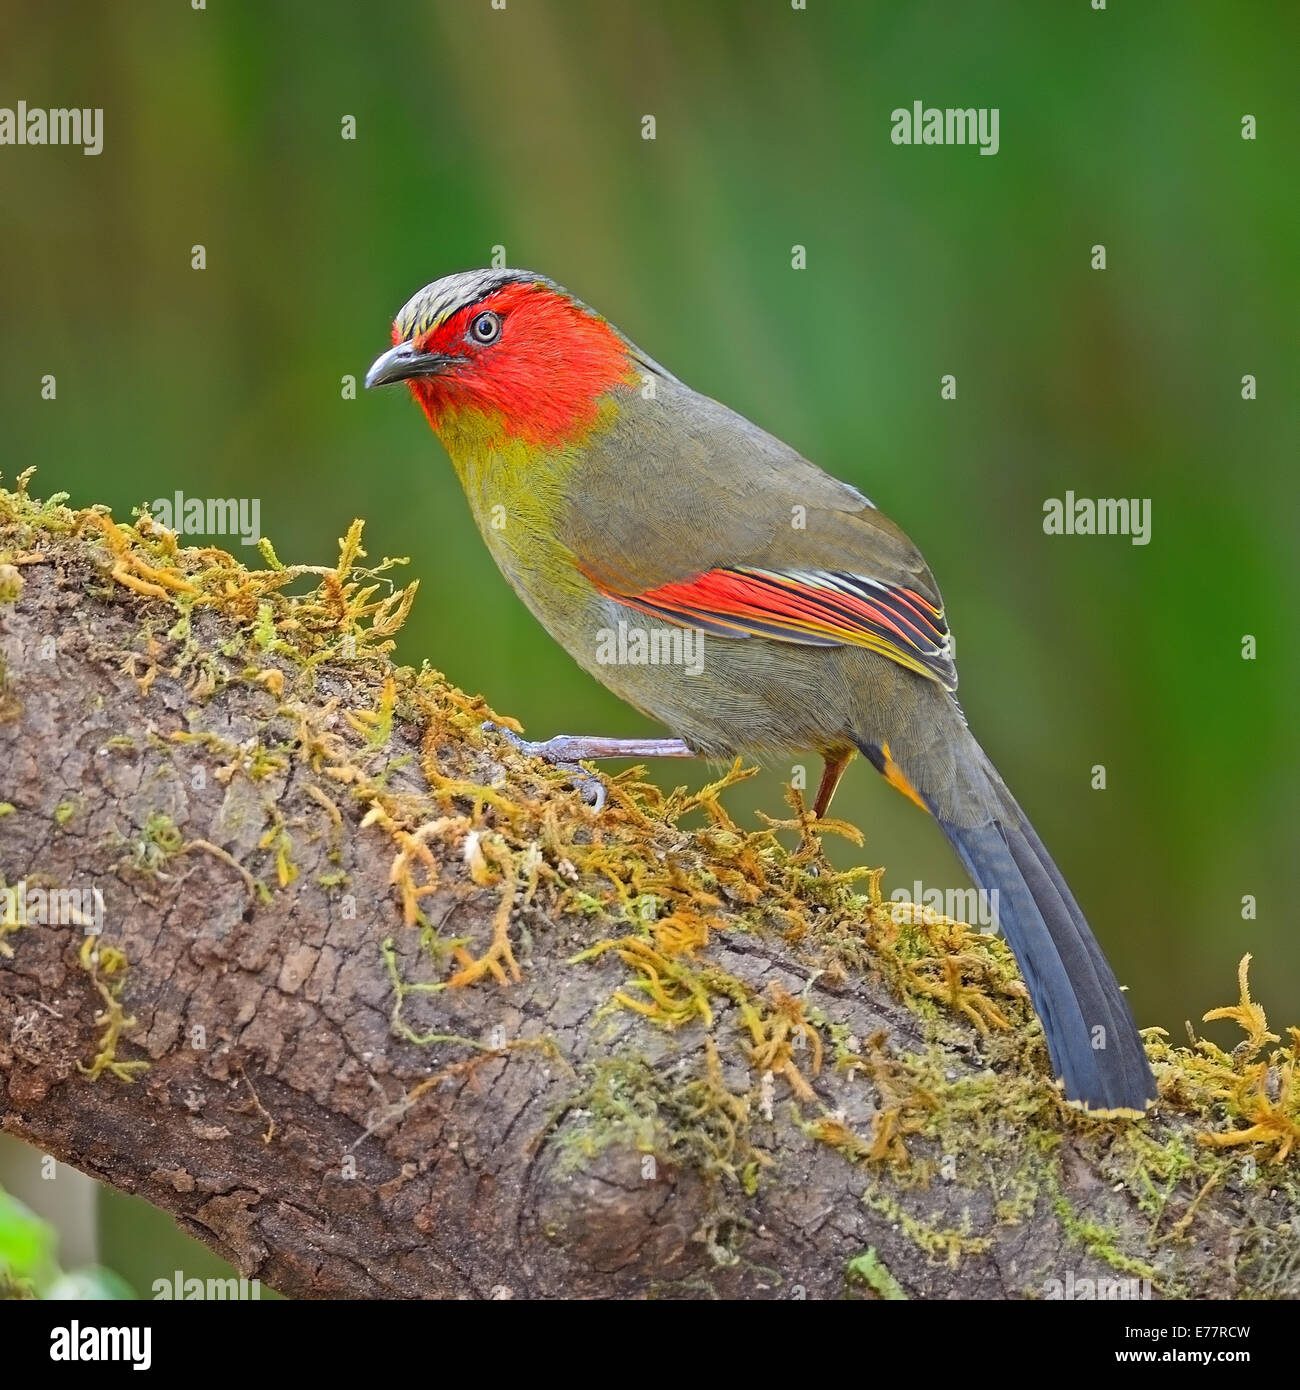 Colorful red-faced bird, Scarlet-faced Liocichla (Liocichla ripponi), standing on the log, side profile Stock Photo